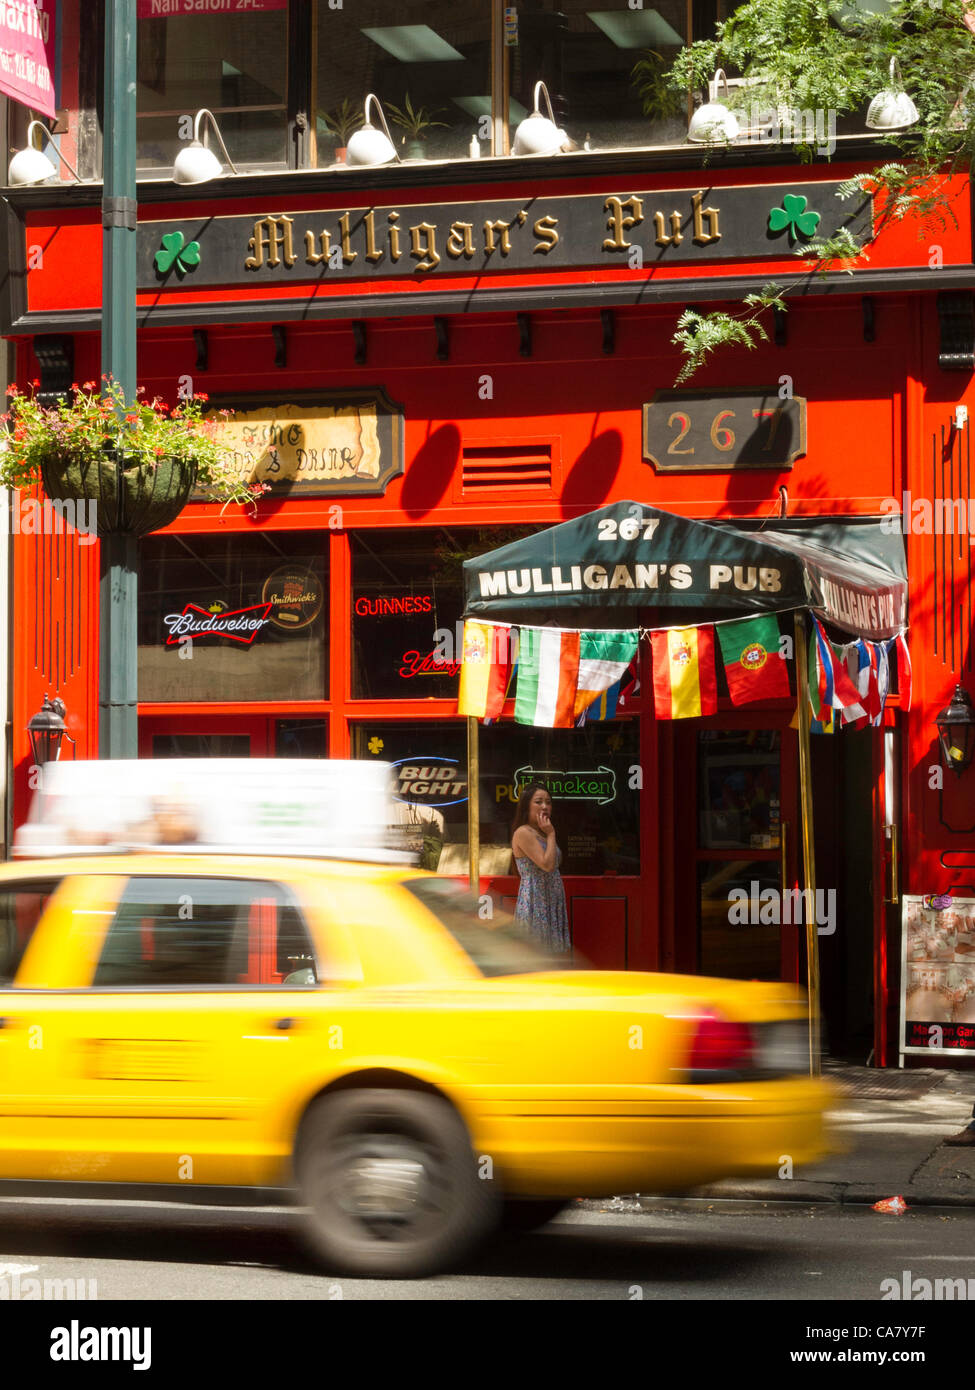 New York City, USA. 24th June 2012.   The UEFA EURO 2012 broadcasts have extended pub hours to accommodate the world time zone differences.  Mulligan's flag display indicates that the tournament is featured on their electronic displays. Stock Photo